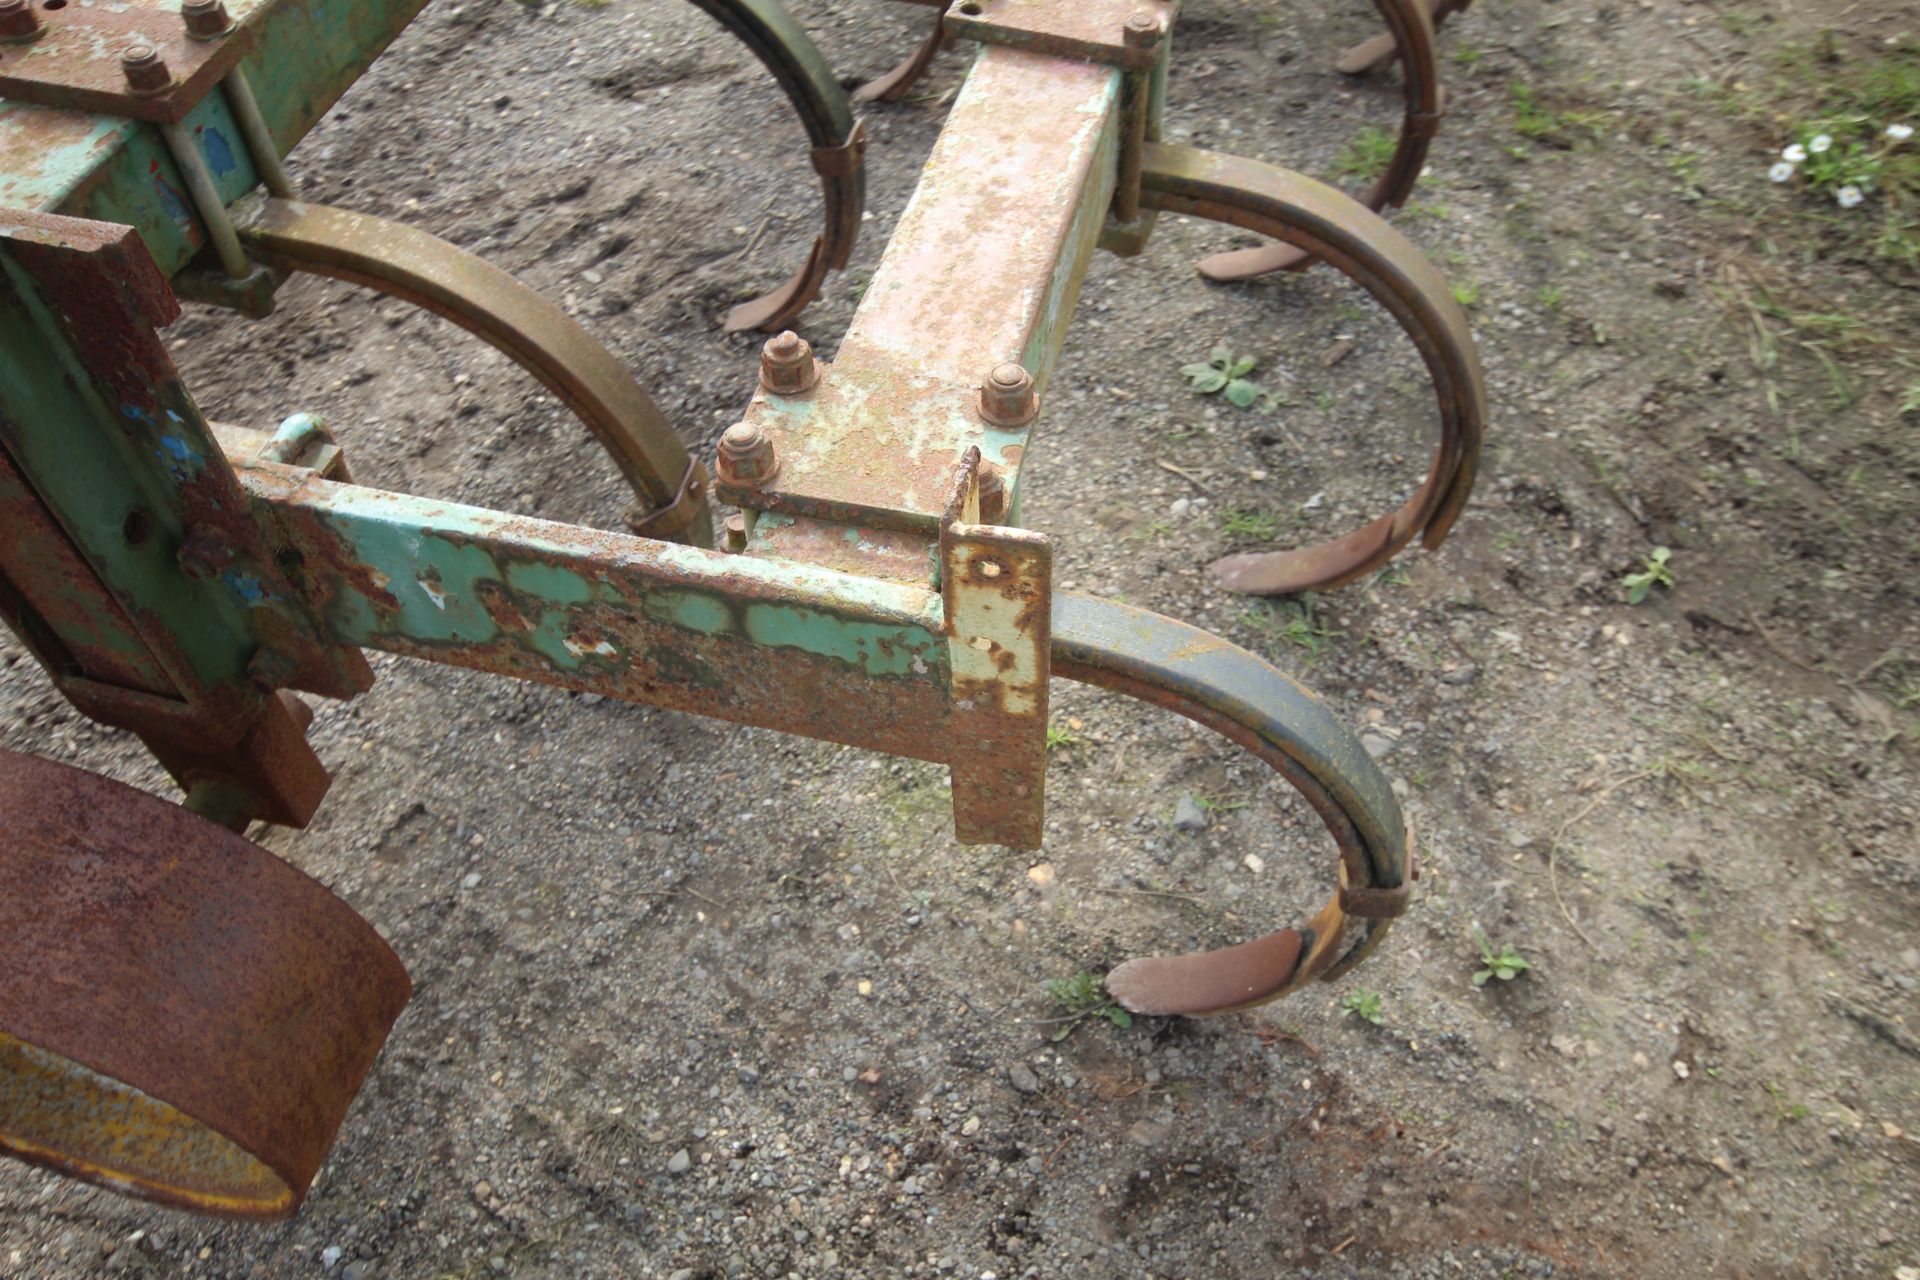 4m sprung tine cultivator. - Image 8 of 15